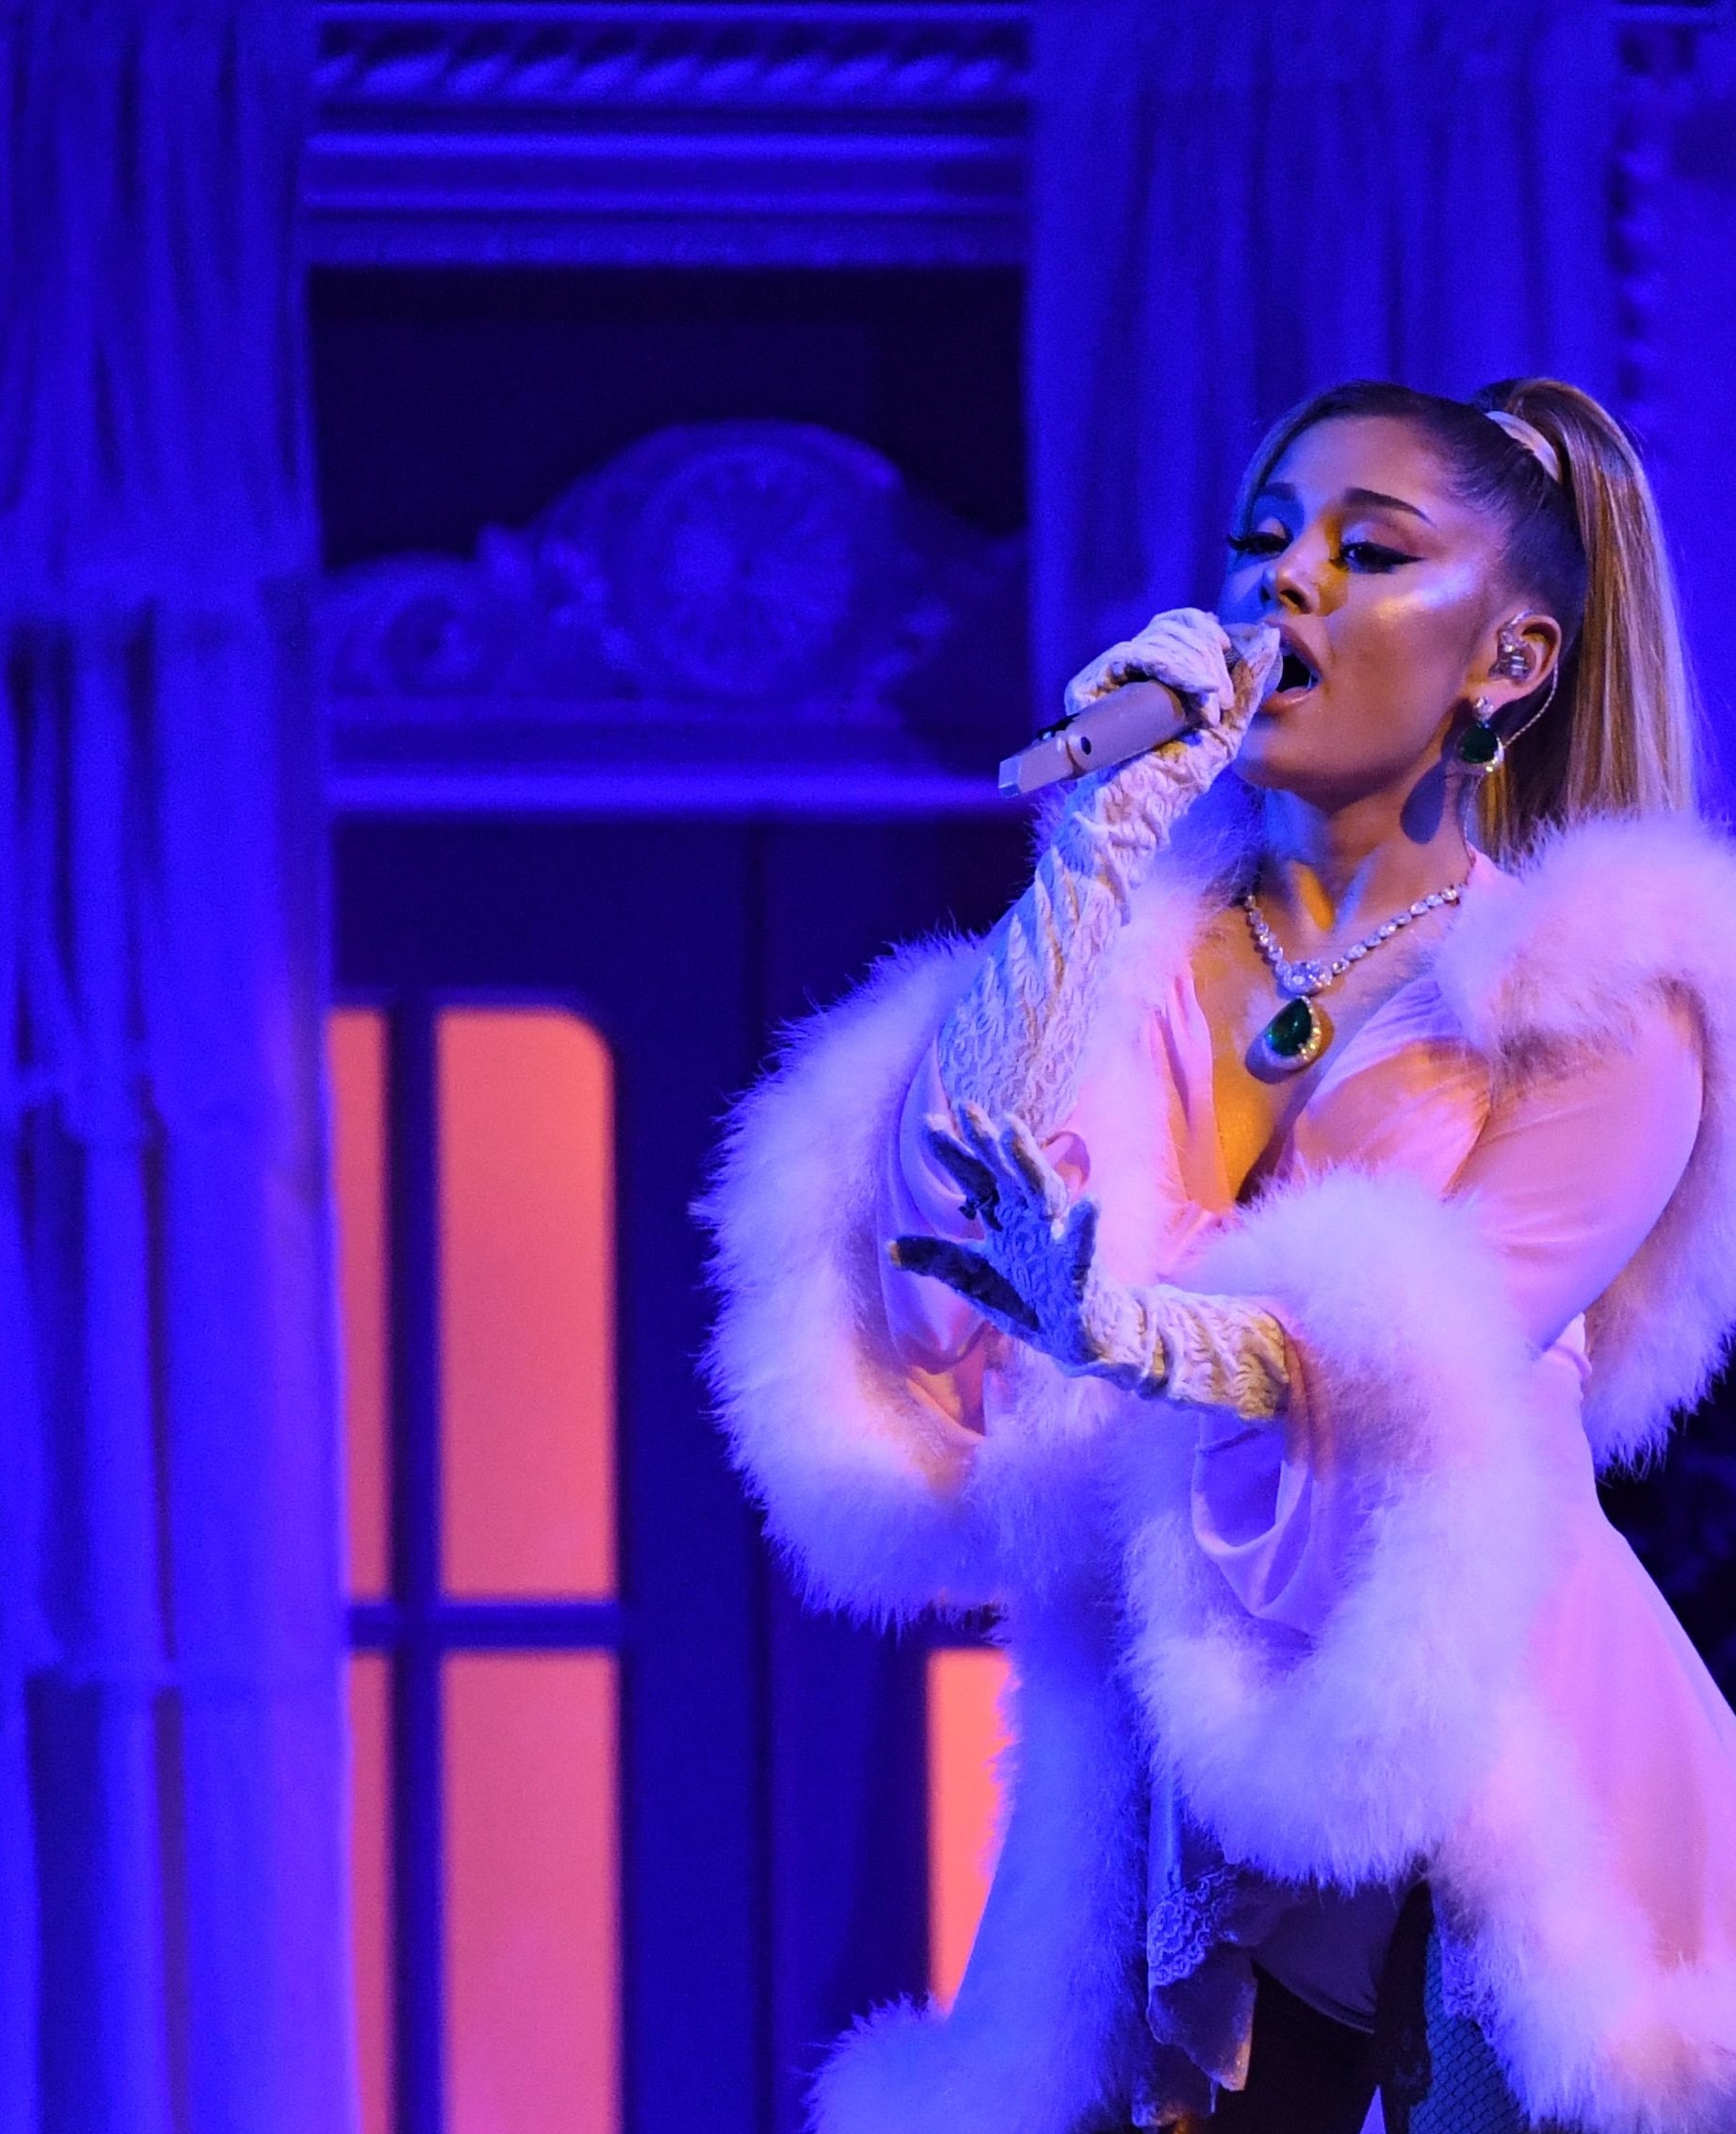 Ariana Grande performs on stage wearing a fur-trimmed outfit and gloves, singing into a microphone with her hair in a high ponytail